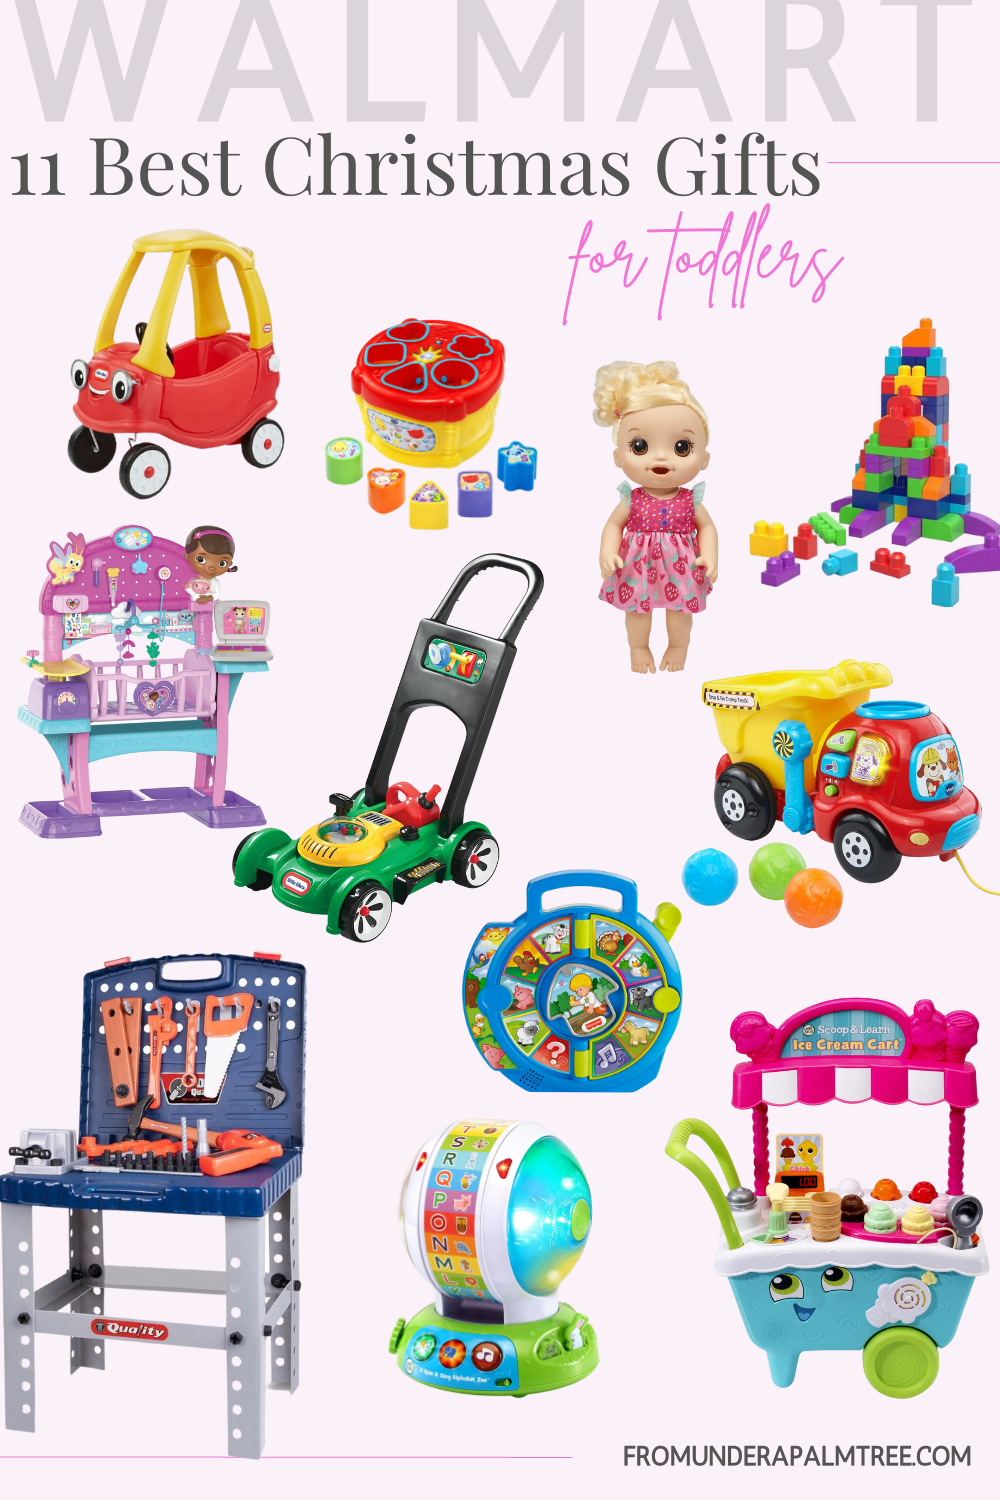 walmart christmas gifts for toddlers | best walmart christmas gifts for toddler boys | best walmart christmas gifts for toddlers | walmart christmas gift guide | walmart kids gifts | best kids christmas gifts from walmart | best kids christmas gifts to buy at walmart | best christmas toddler gifts | what to buy a toddler for Christmas | toddler boy christmas gifts | toddler girl christmas gifts | toddler christmas gifts | best 2023 christmas gifts for kids | gifts guide |